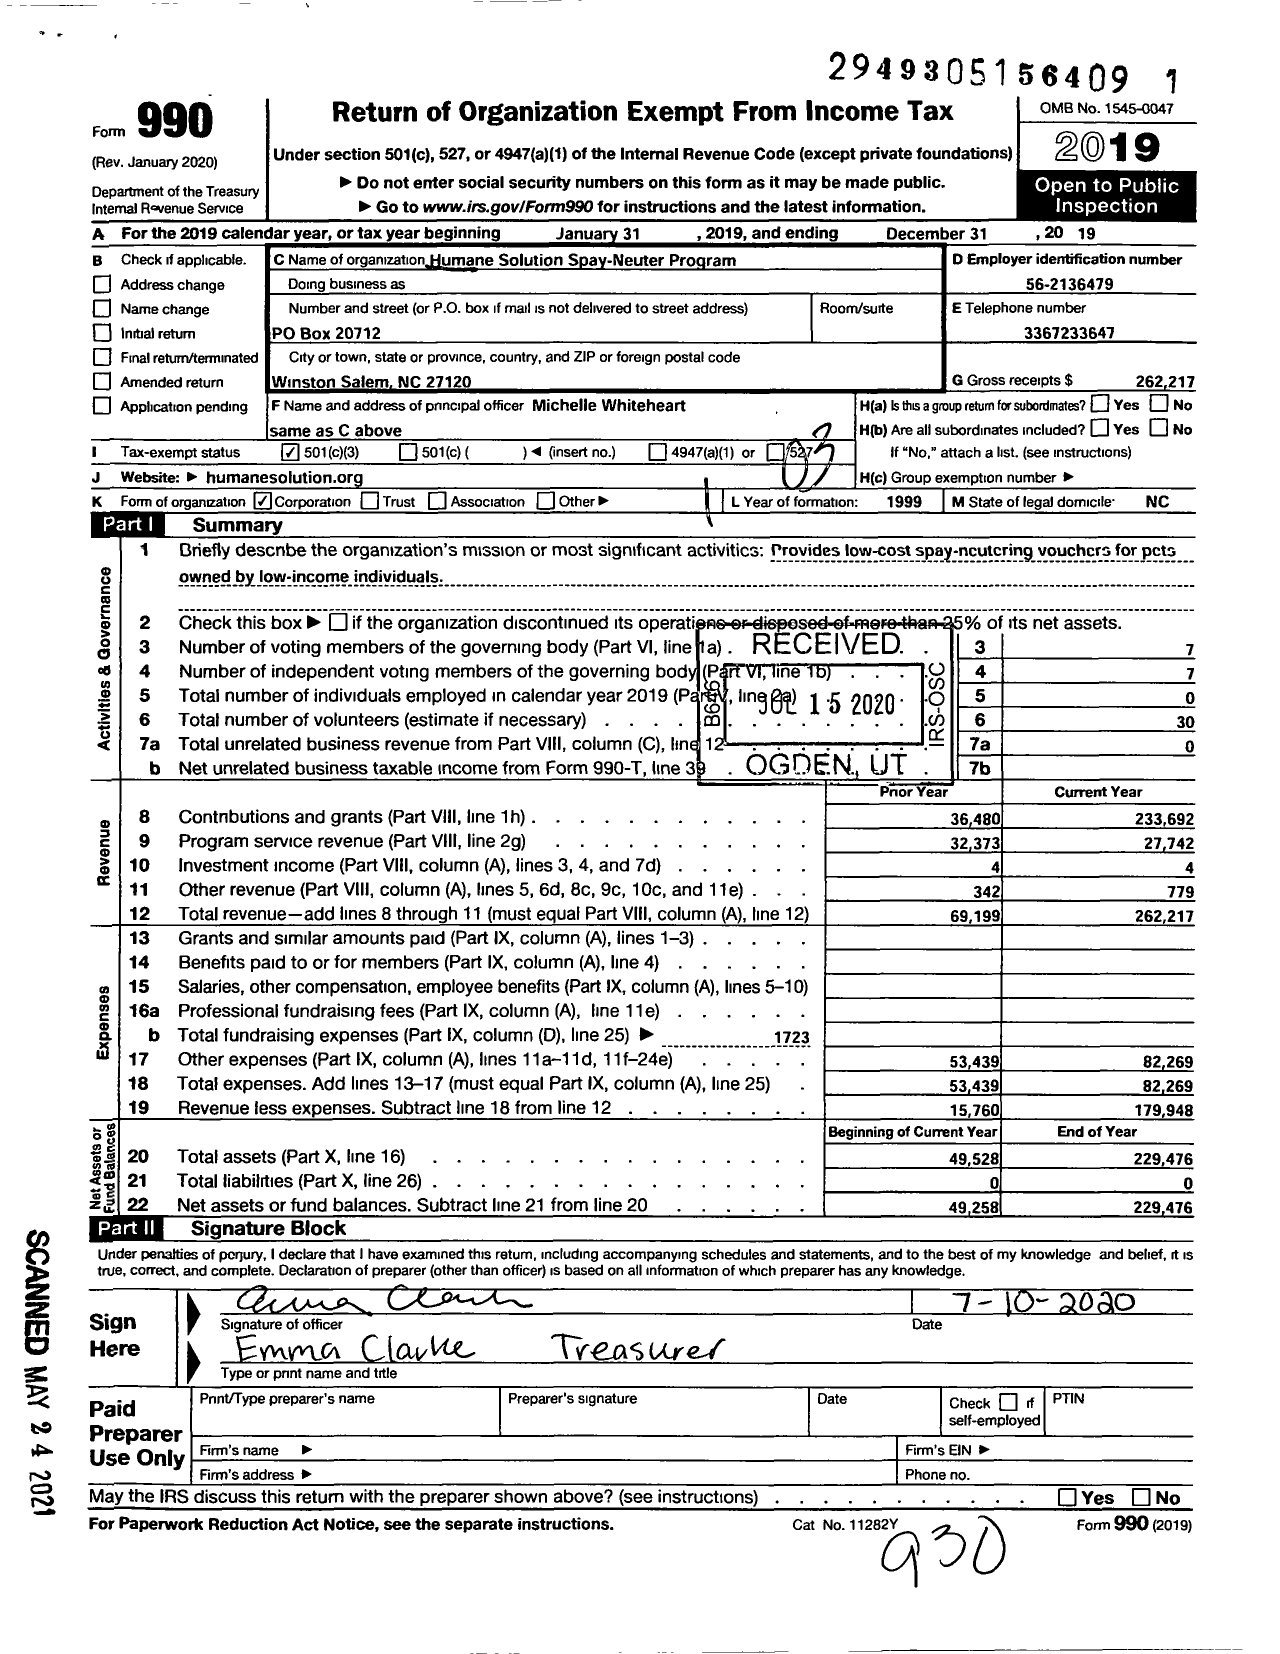 Image of first page of 2019 Form 990 for Humane Solution Spay-Neuter Program